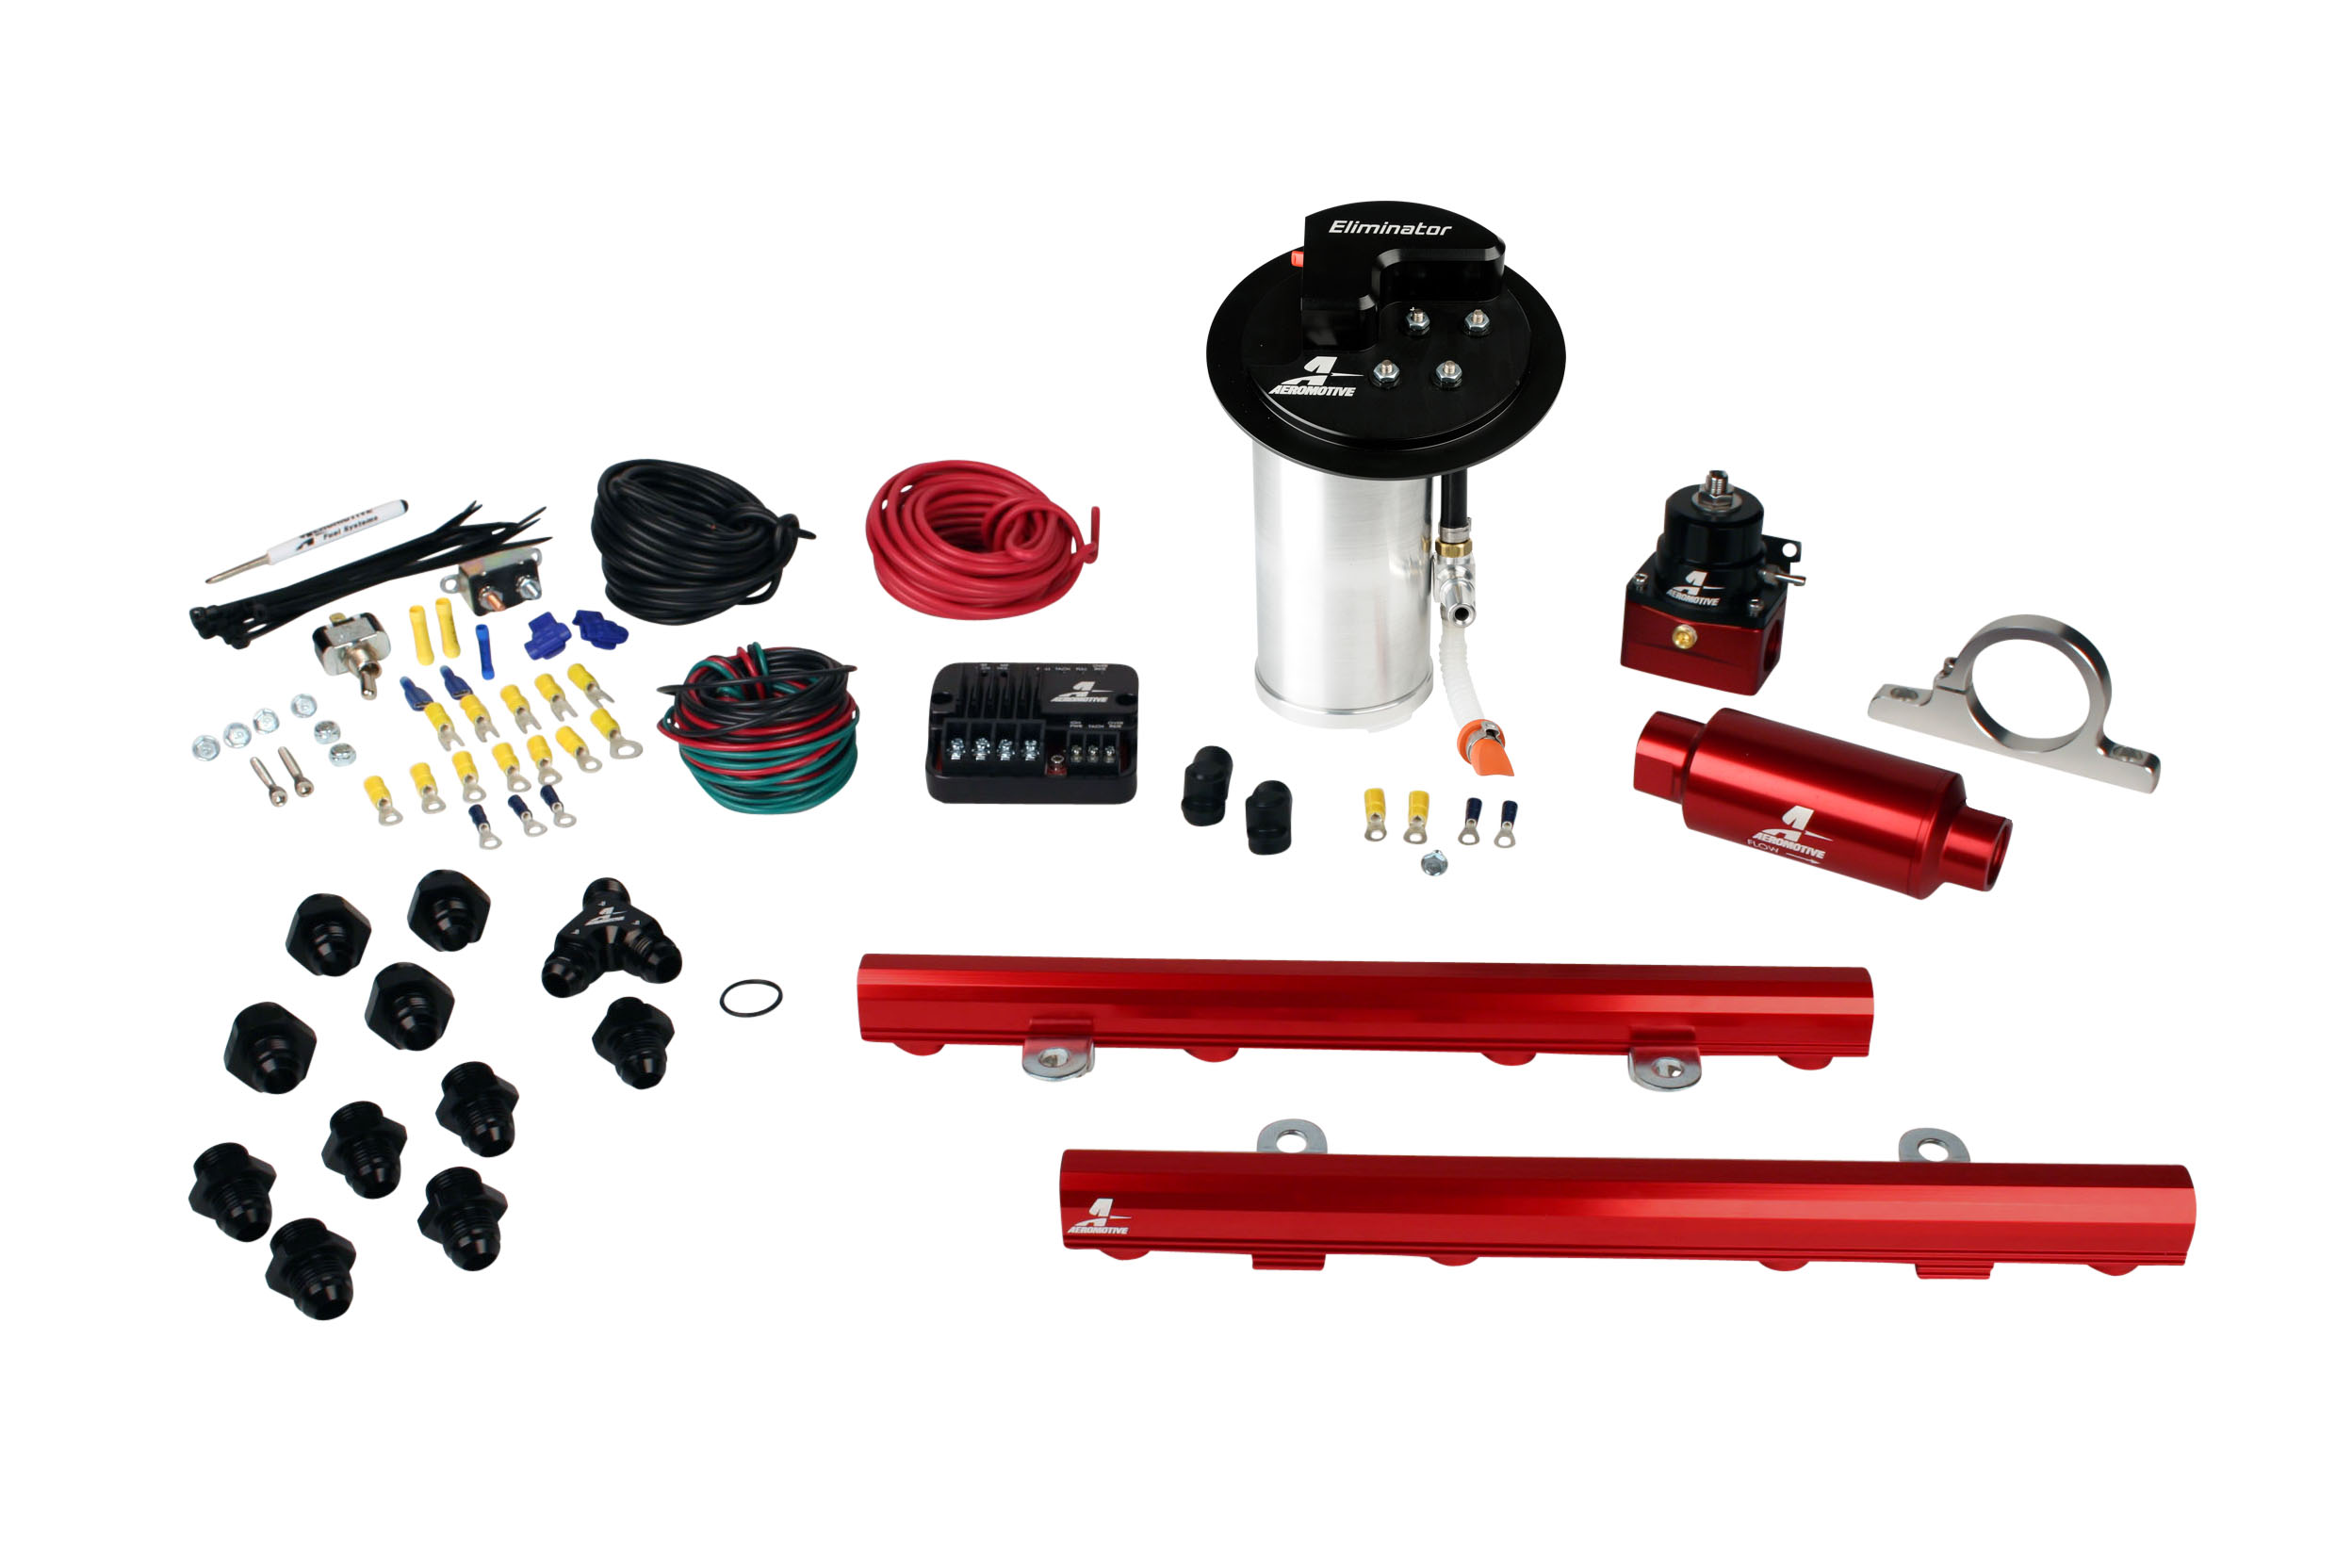 2010-2017 Ford Mustang GT Aeromotive Stealth A1000 Street Fuel System w/5.0L 4 Valve Fuel Rail